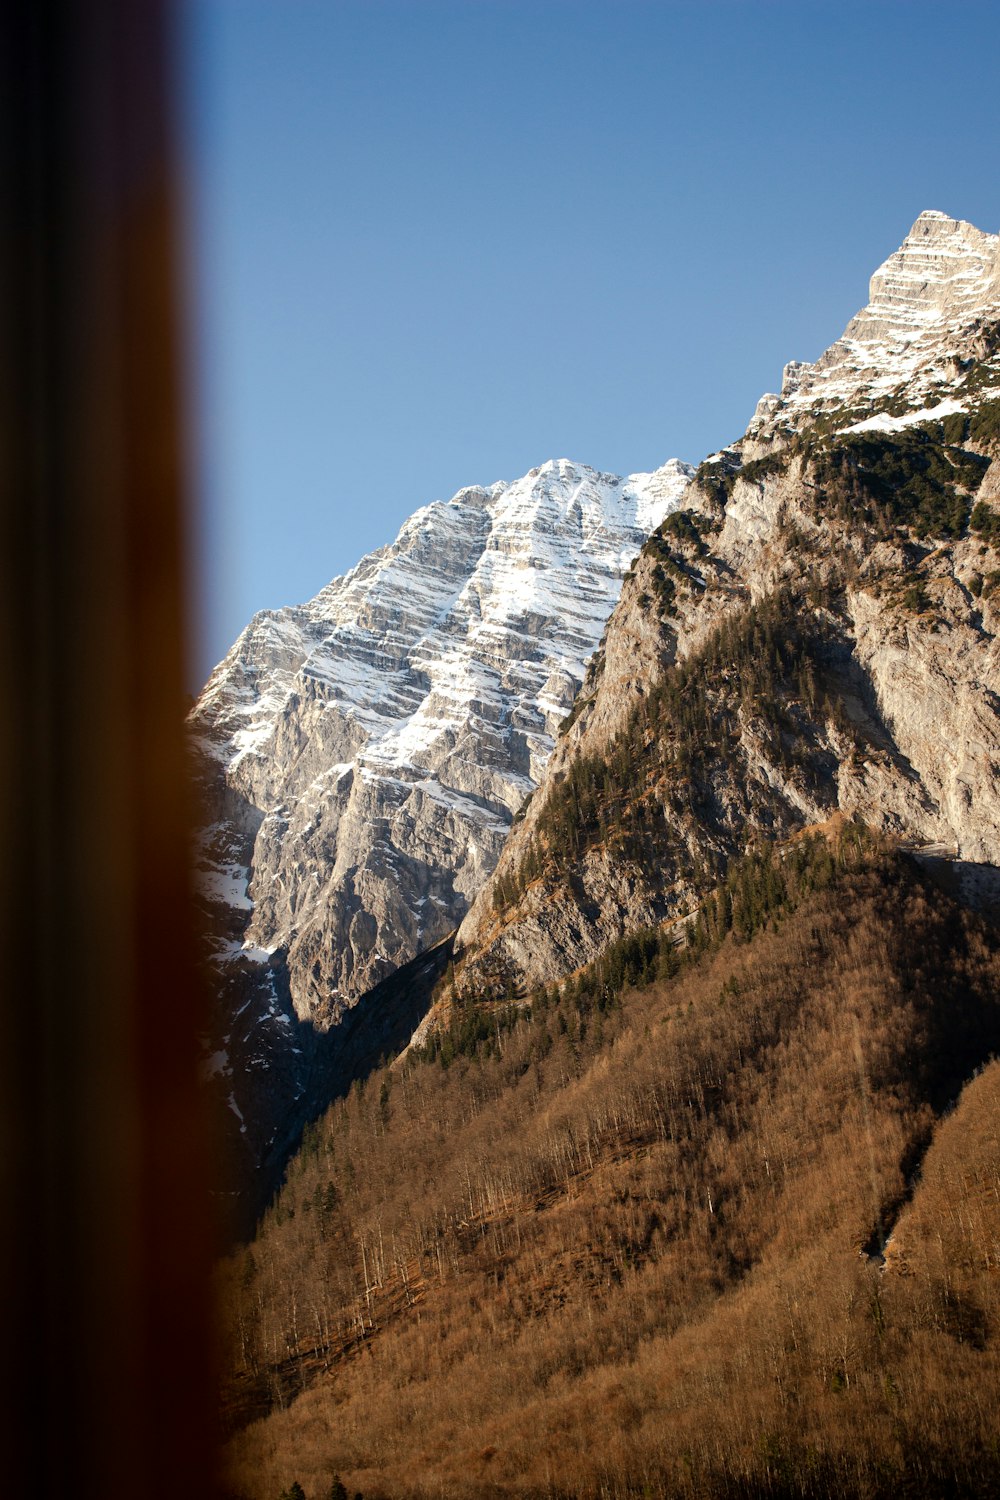 a view of a snowy mountain from a train window